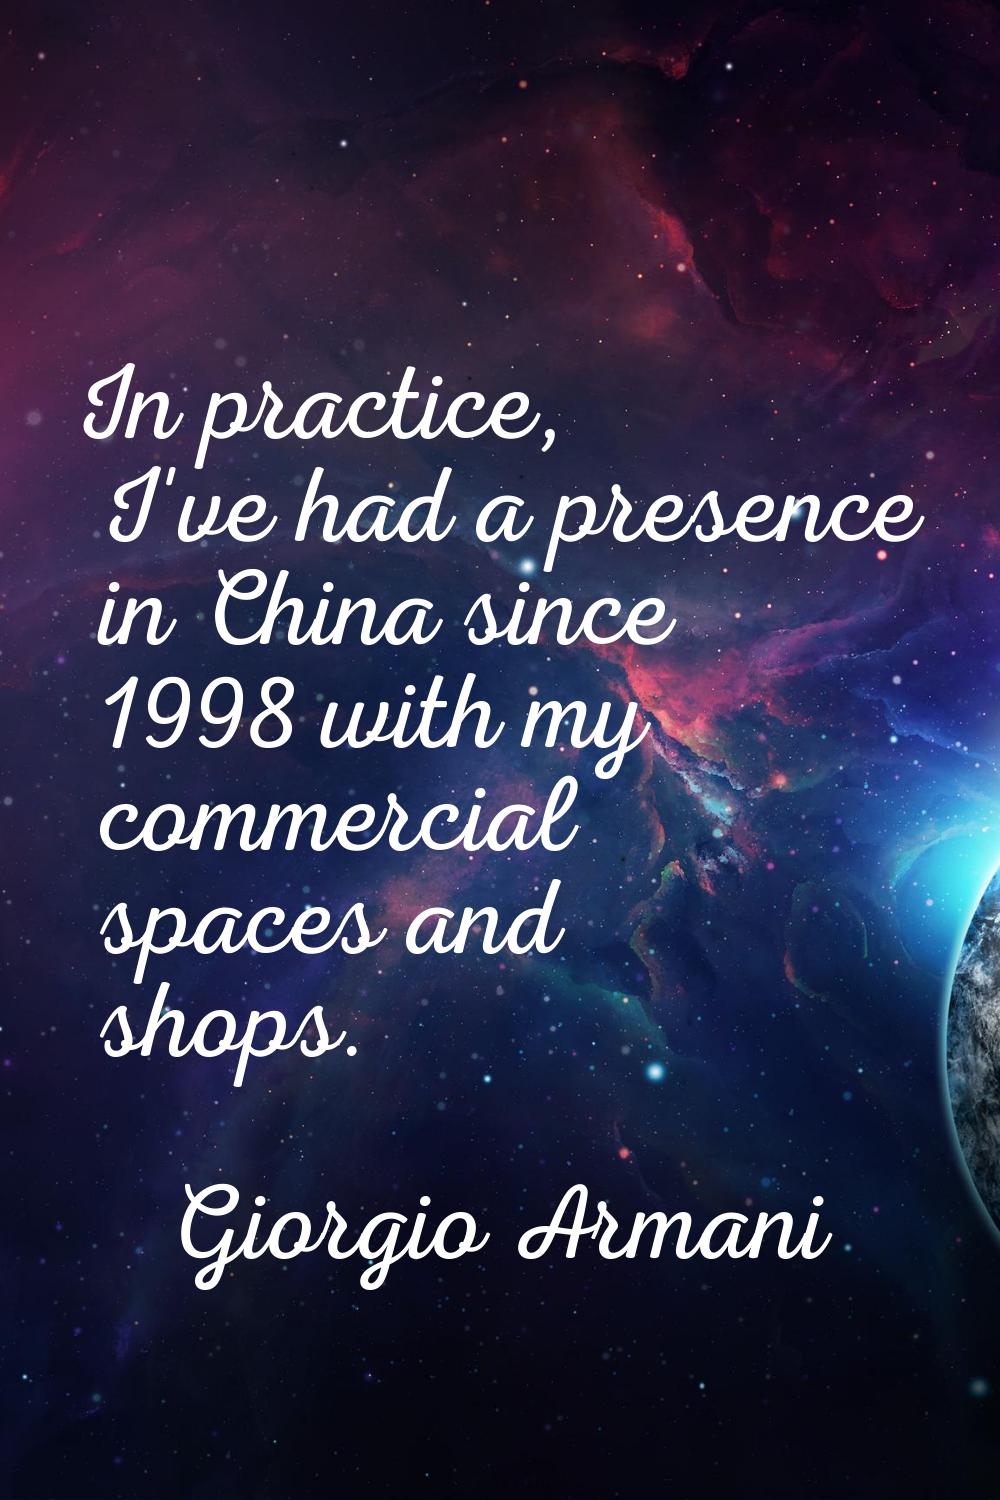 In practice, I've had a presence in China since 1998 with my commercial spaces and shops.